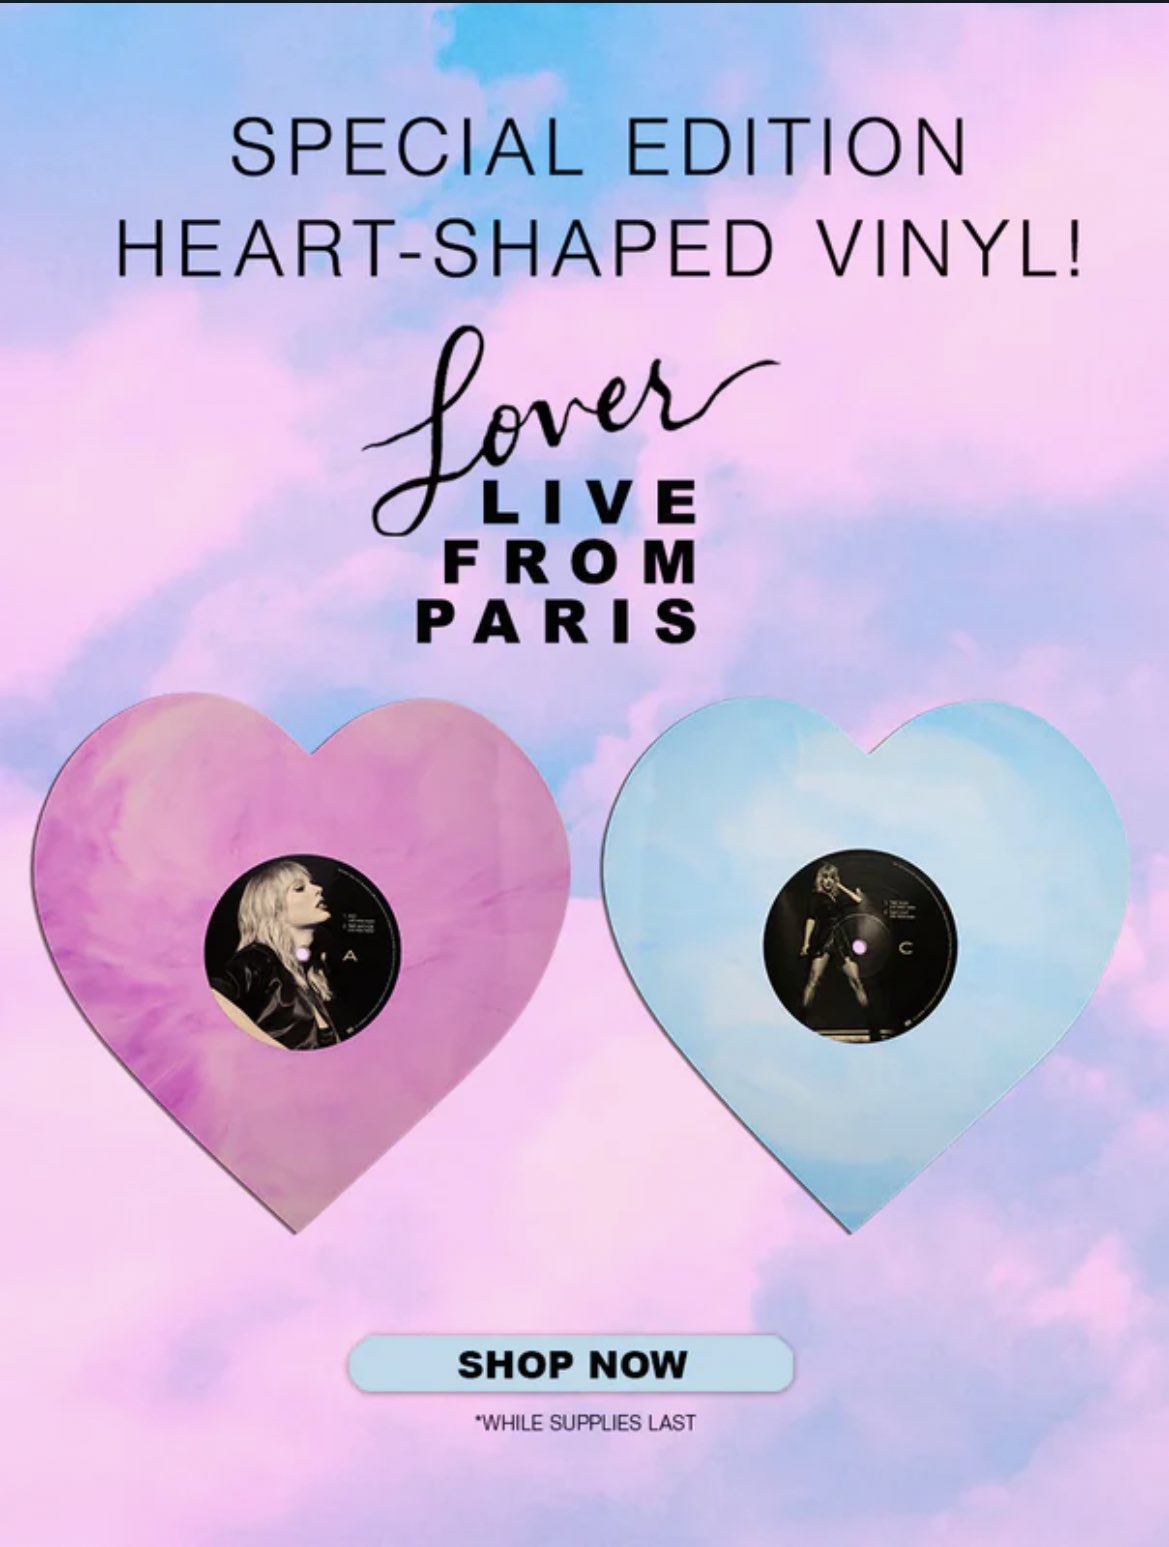 Taylor Swift - Lover (Live From Paris) - Heart Shaped Vinyl - Rare Sold Out  for Sale in Los Angeles, CA - OfferUp